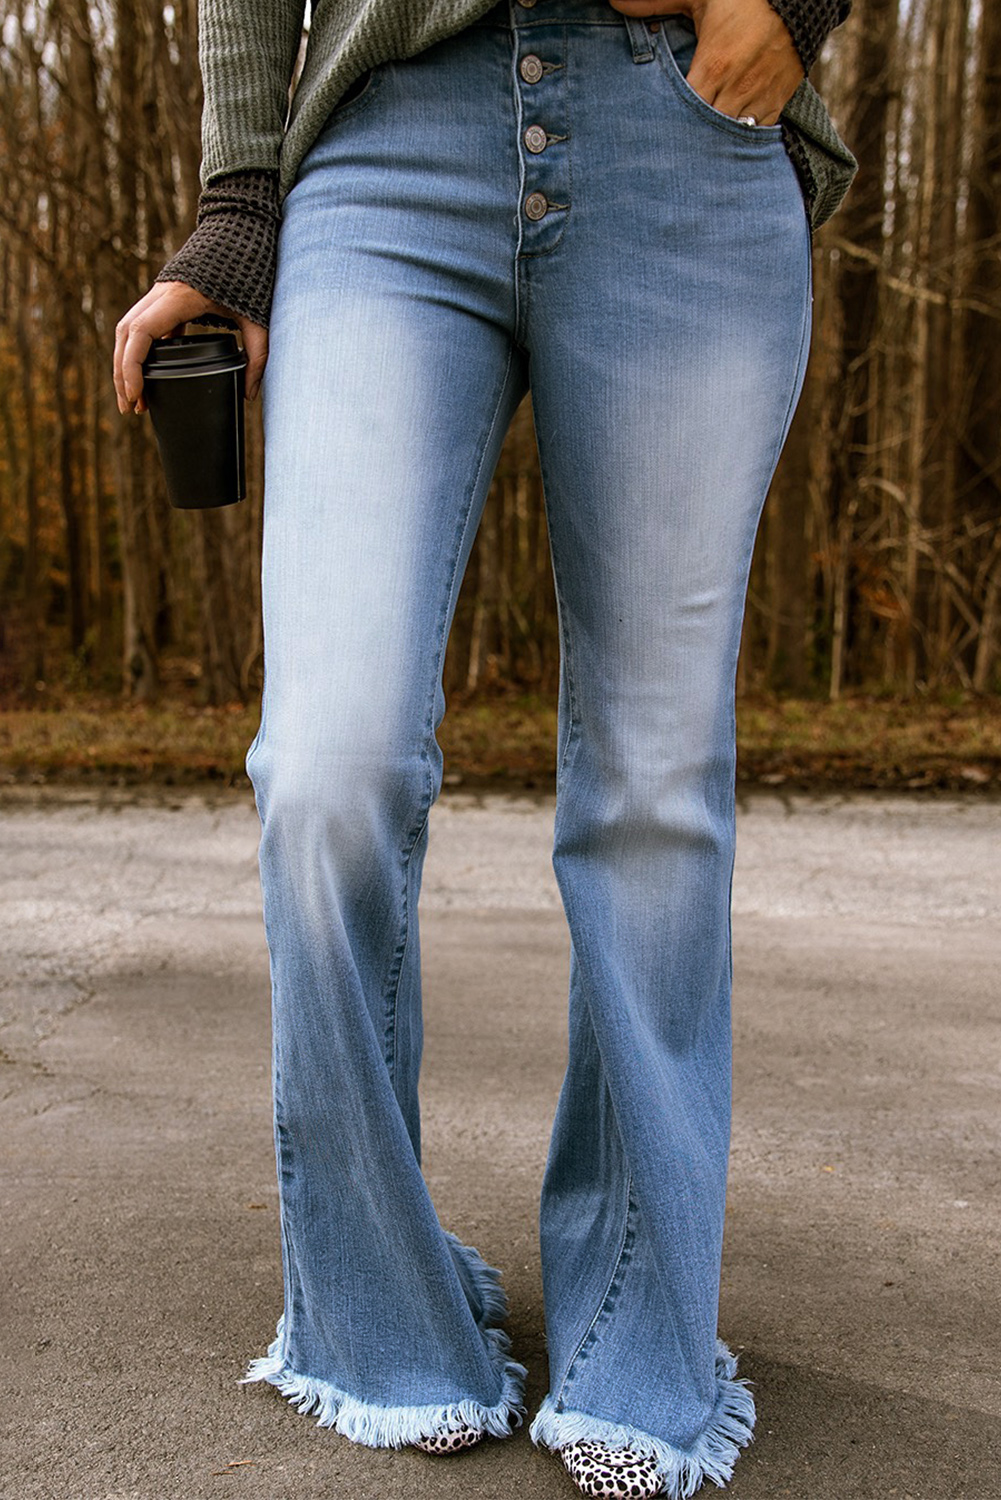 Important factors to consider when selecting the most common jeans available for women